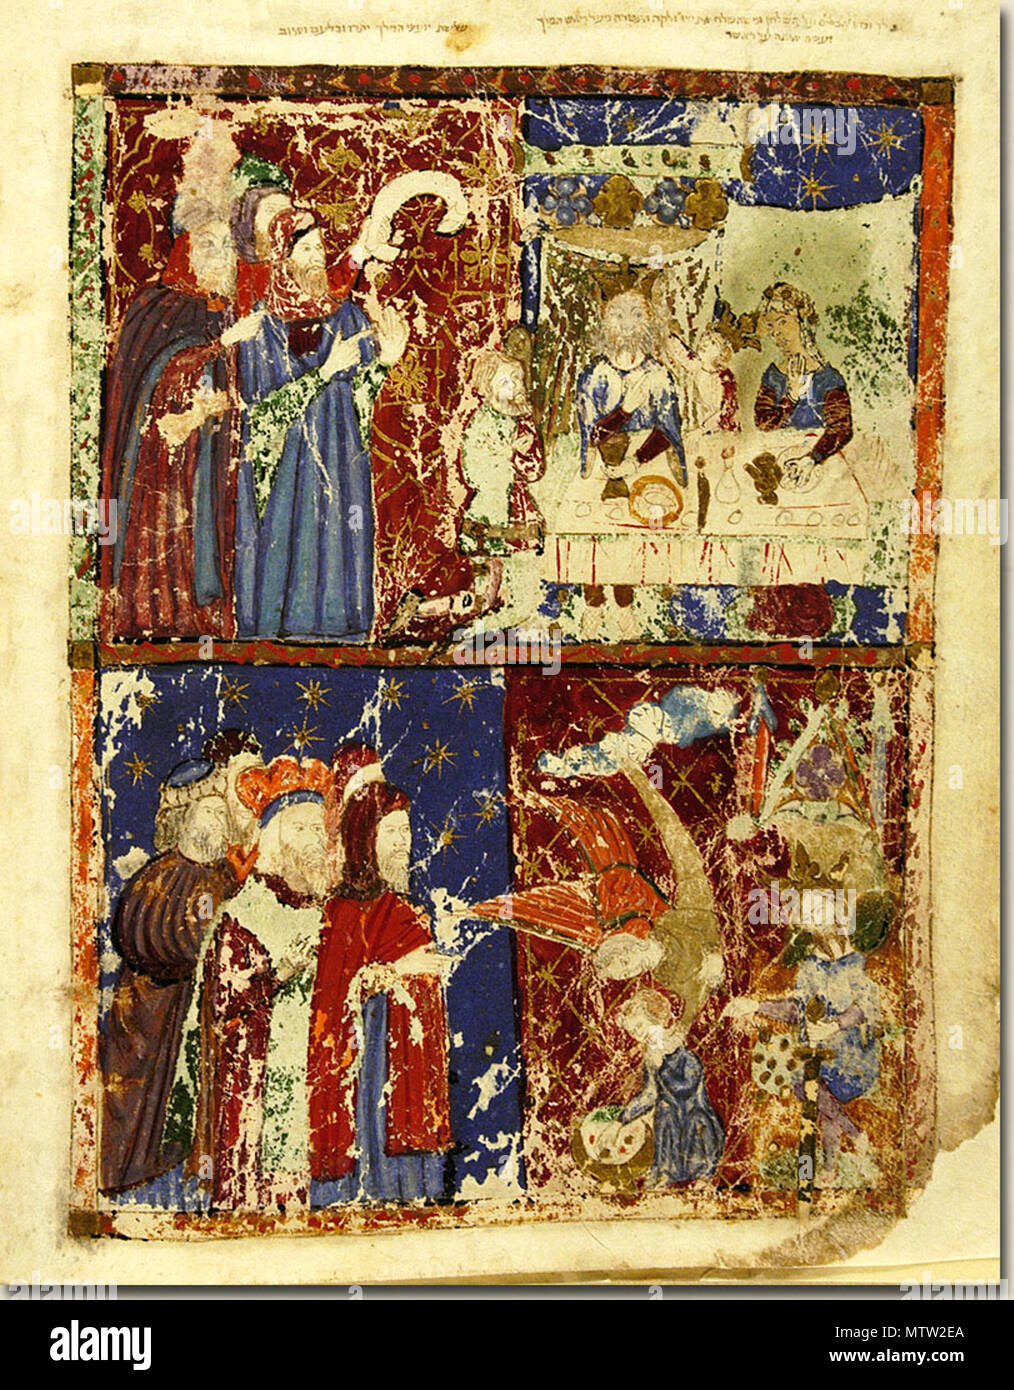 . English: Illustration in the 14th-century Kaufmann Haggadah, scenes from Moses' childhood when he was living at Pharaoh's court (f.9v). These scenes do not appear in the Bible itself but have been preserved in the rich treasury of Jewish legend. For a detailed description of these scenes we turn to Gabrielle Sed-Rajna: Upper compartment: Moses taking off Pharaoh's crown. Pharaoh was dining one day in the company of his daughter and Moses. Pharaoh's daughter, wearing a gold diadem, is seated on the right, the crowned Pharaoh in the center and between them the young Moses wearing also a crown. Stock Photo